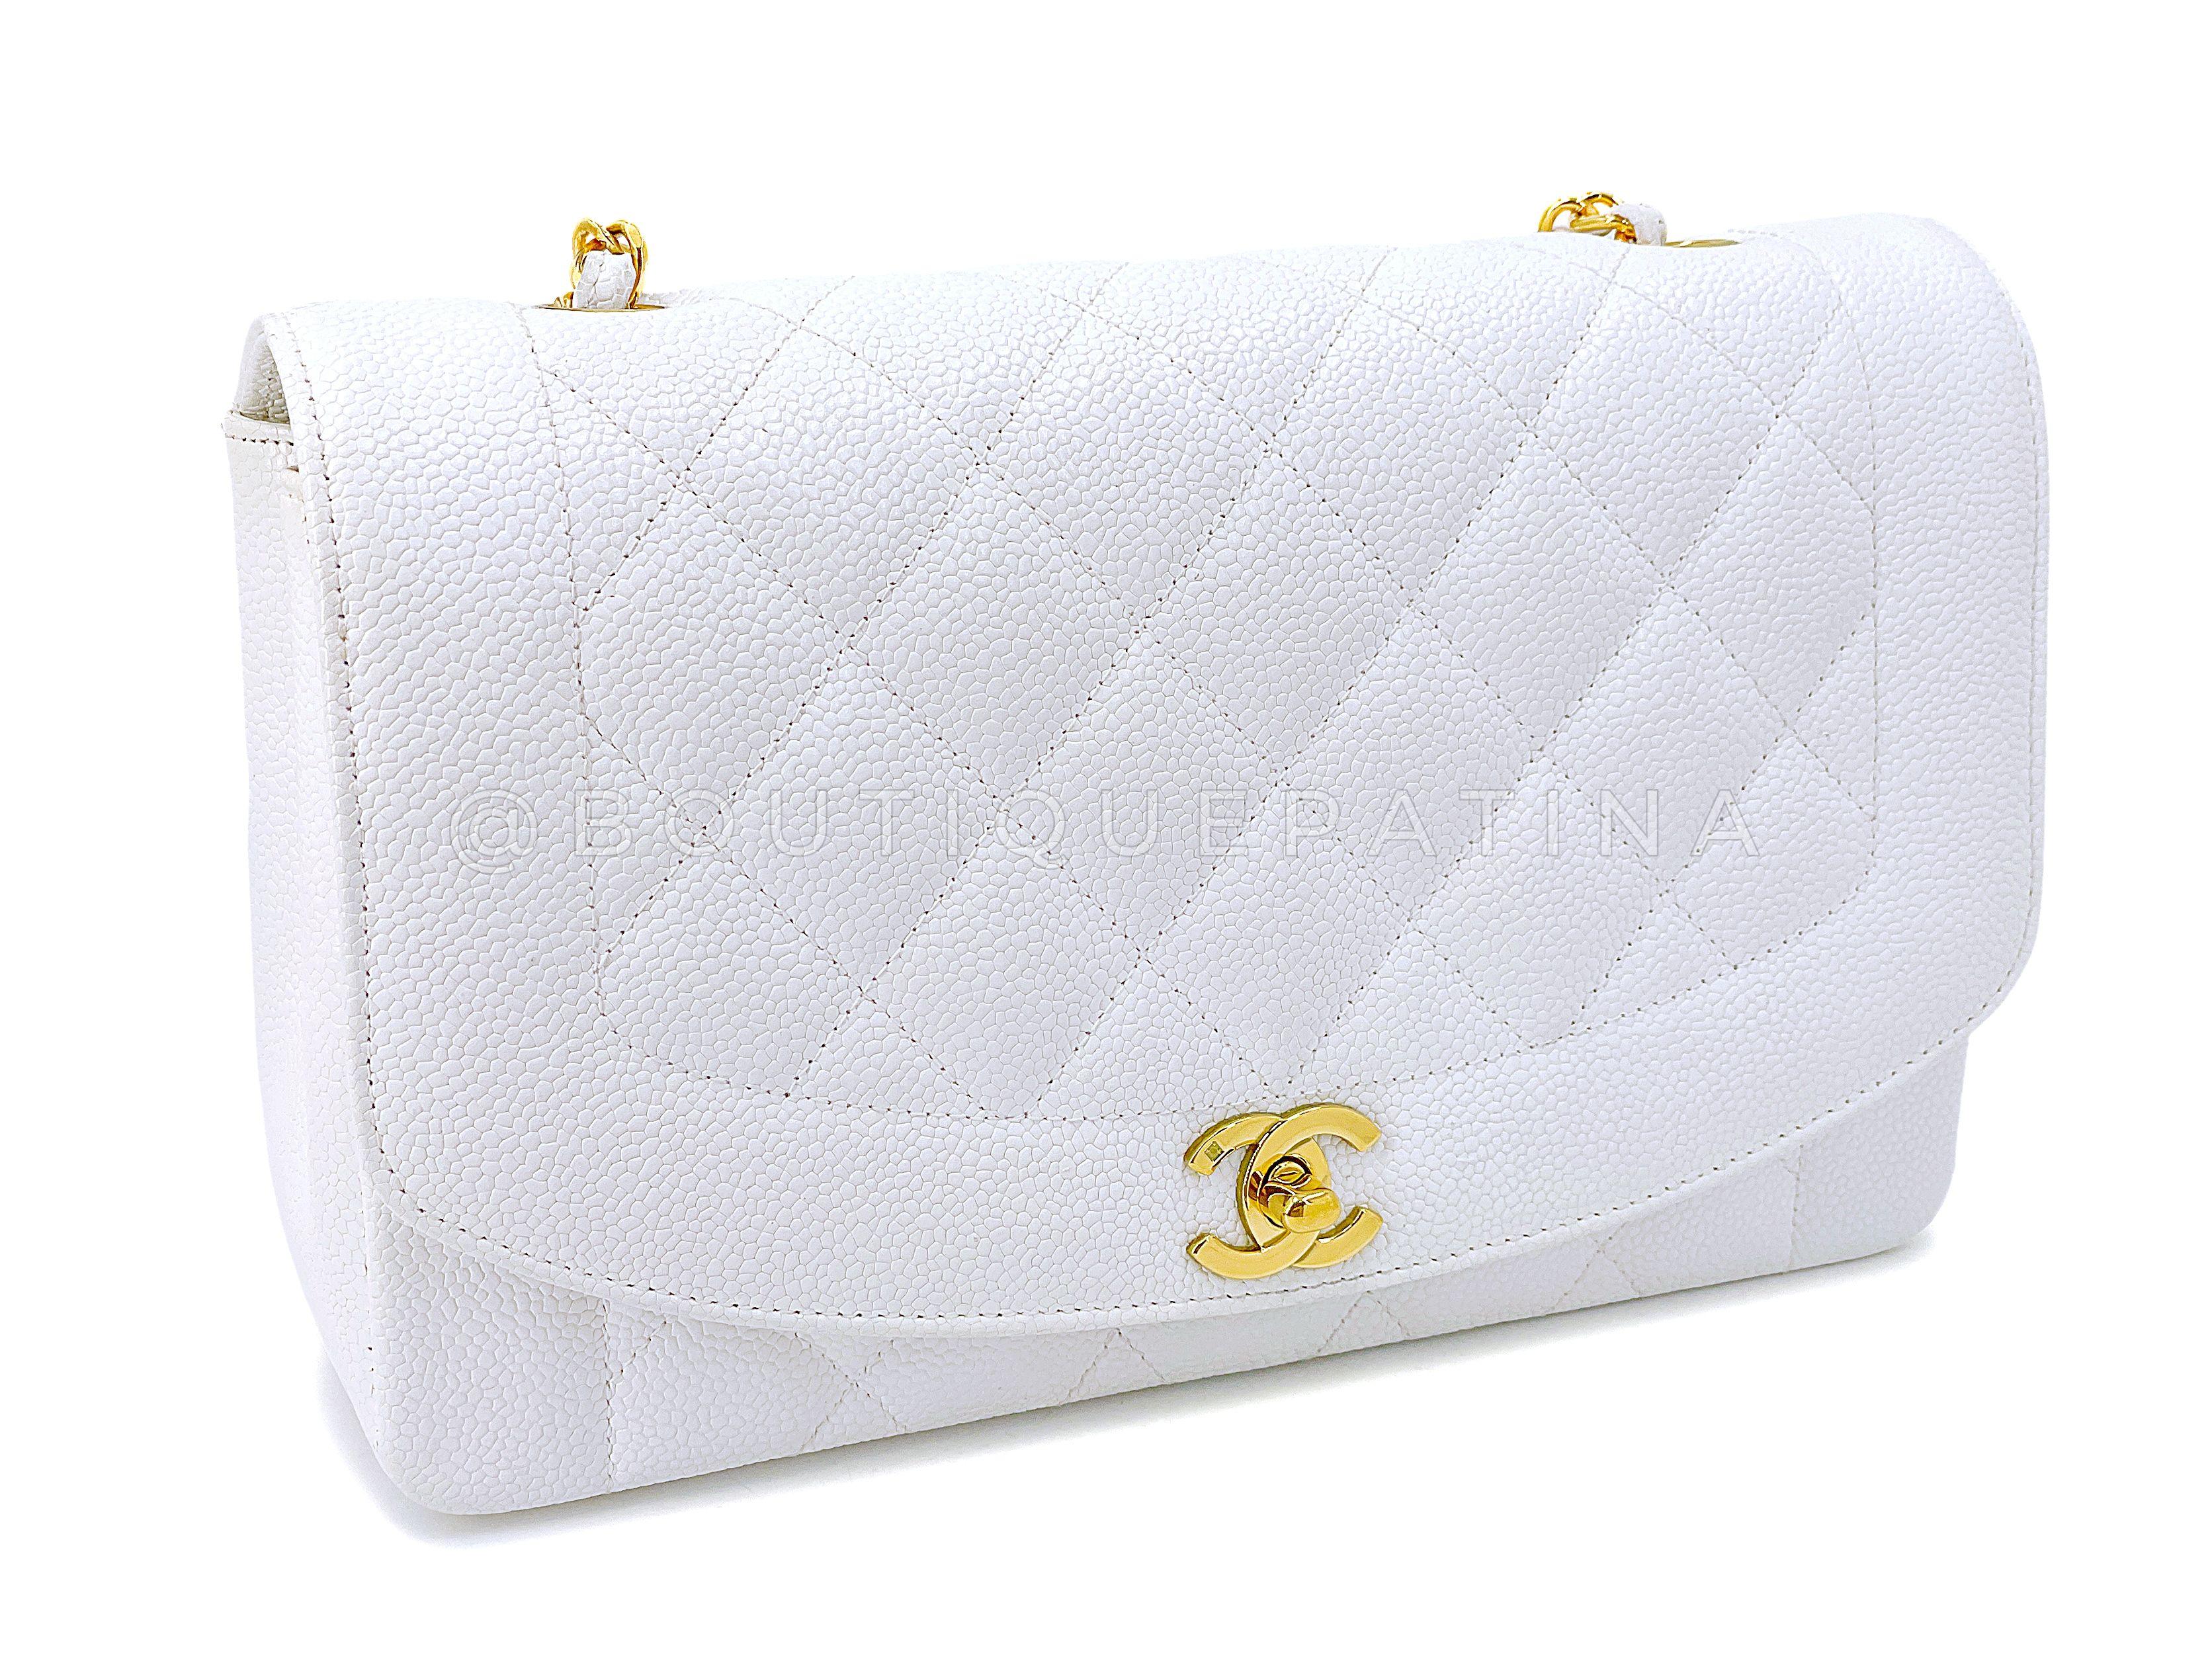 Chanel Vintage 1994 White Caviar Medium Diana Flap Bag 24k GHW 67764 In Excellent Condition For Sale In Costa Mesa, CA